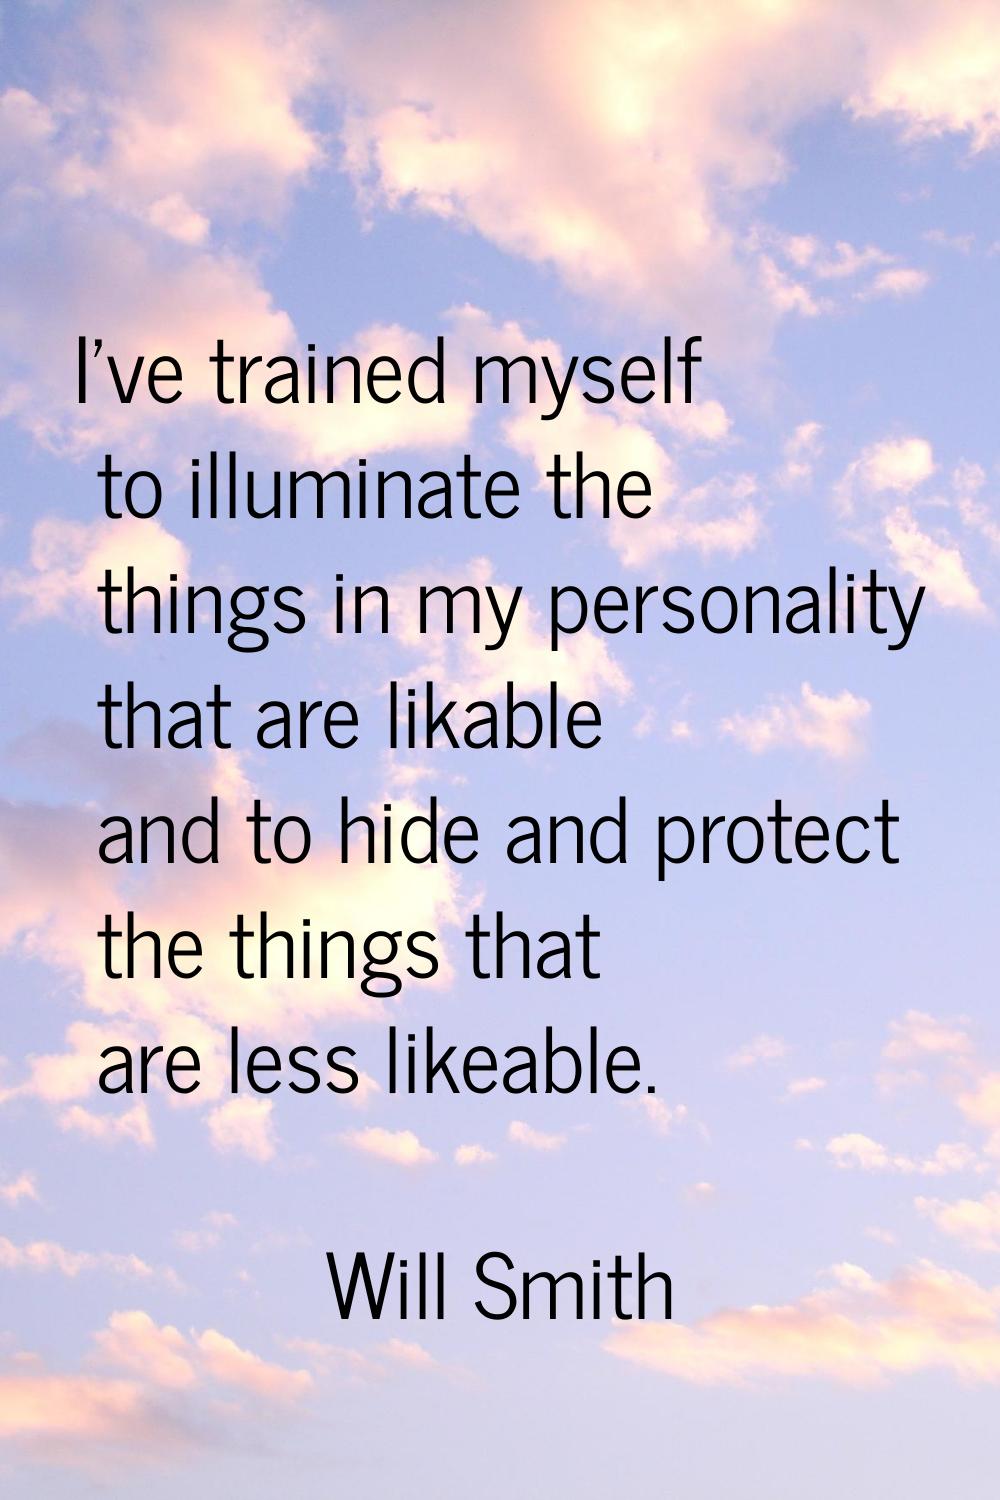 I've trained myself to illuminate the things in my personality that are likable and to hide and pro